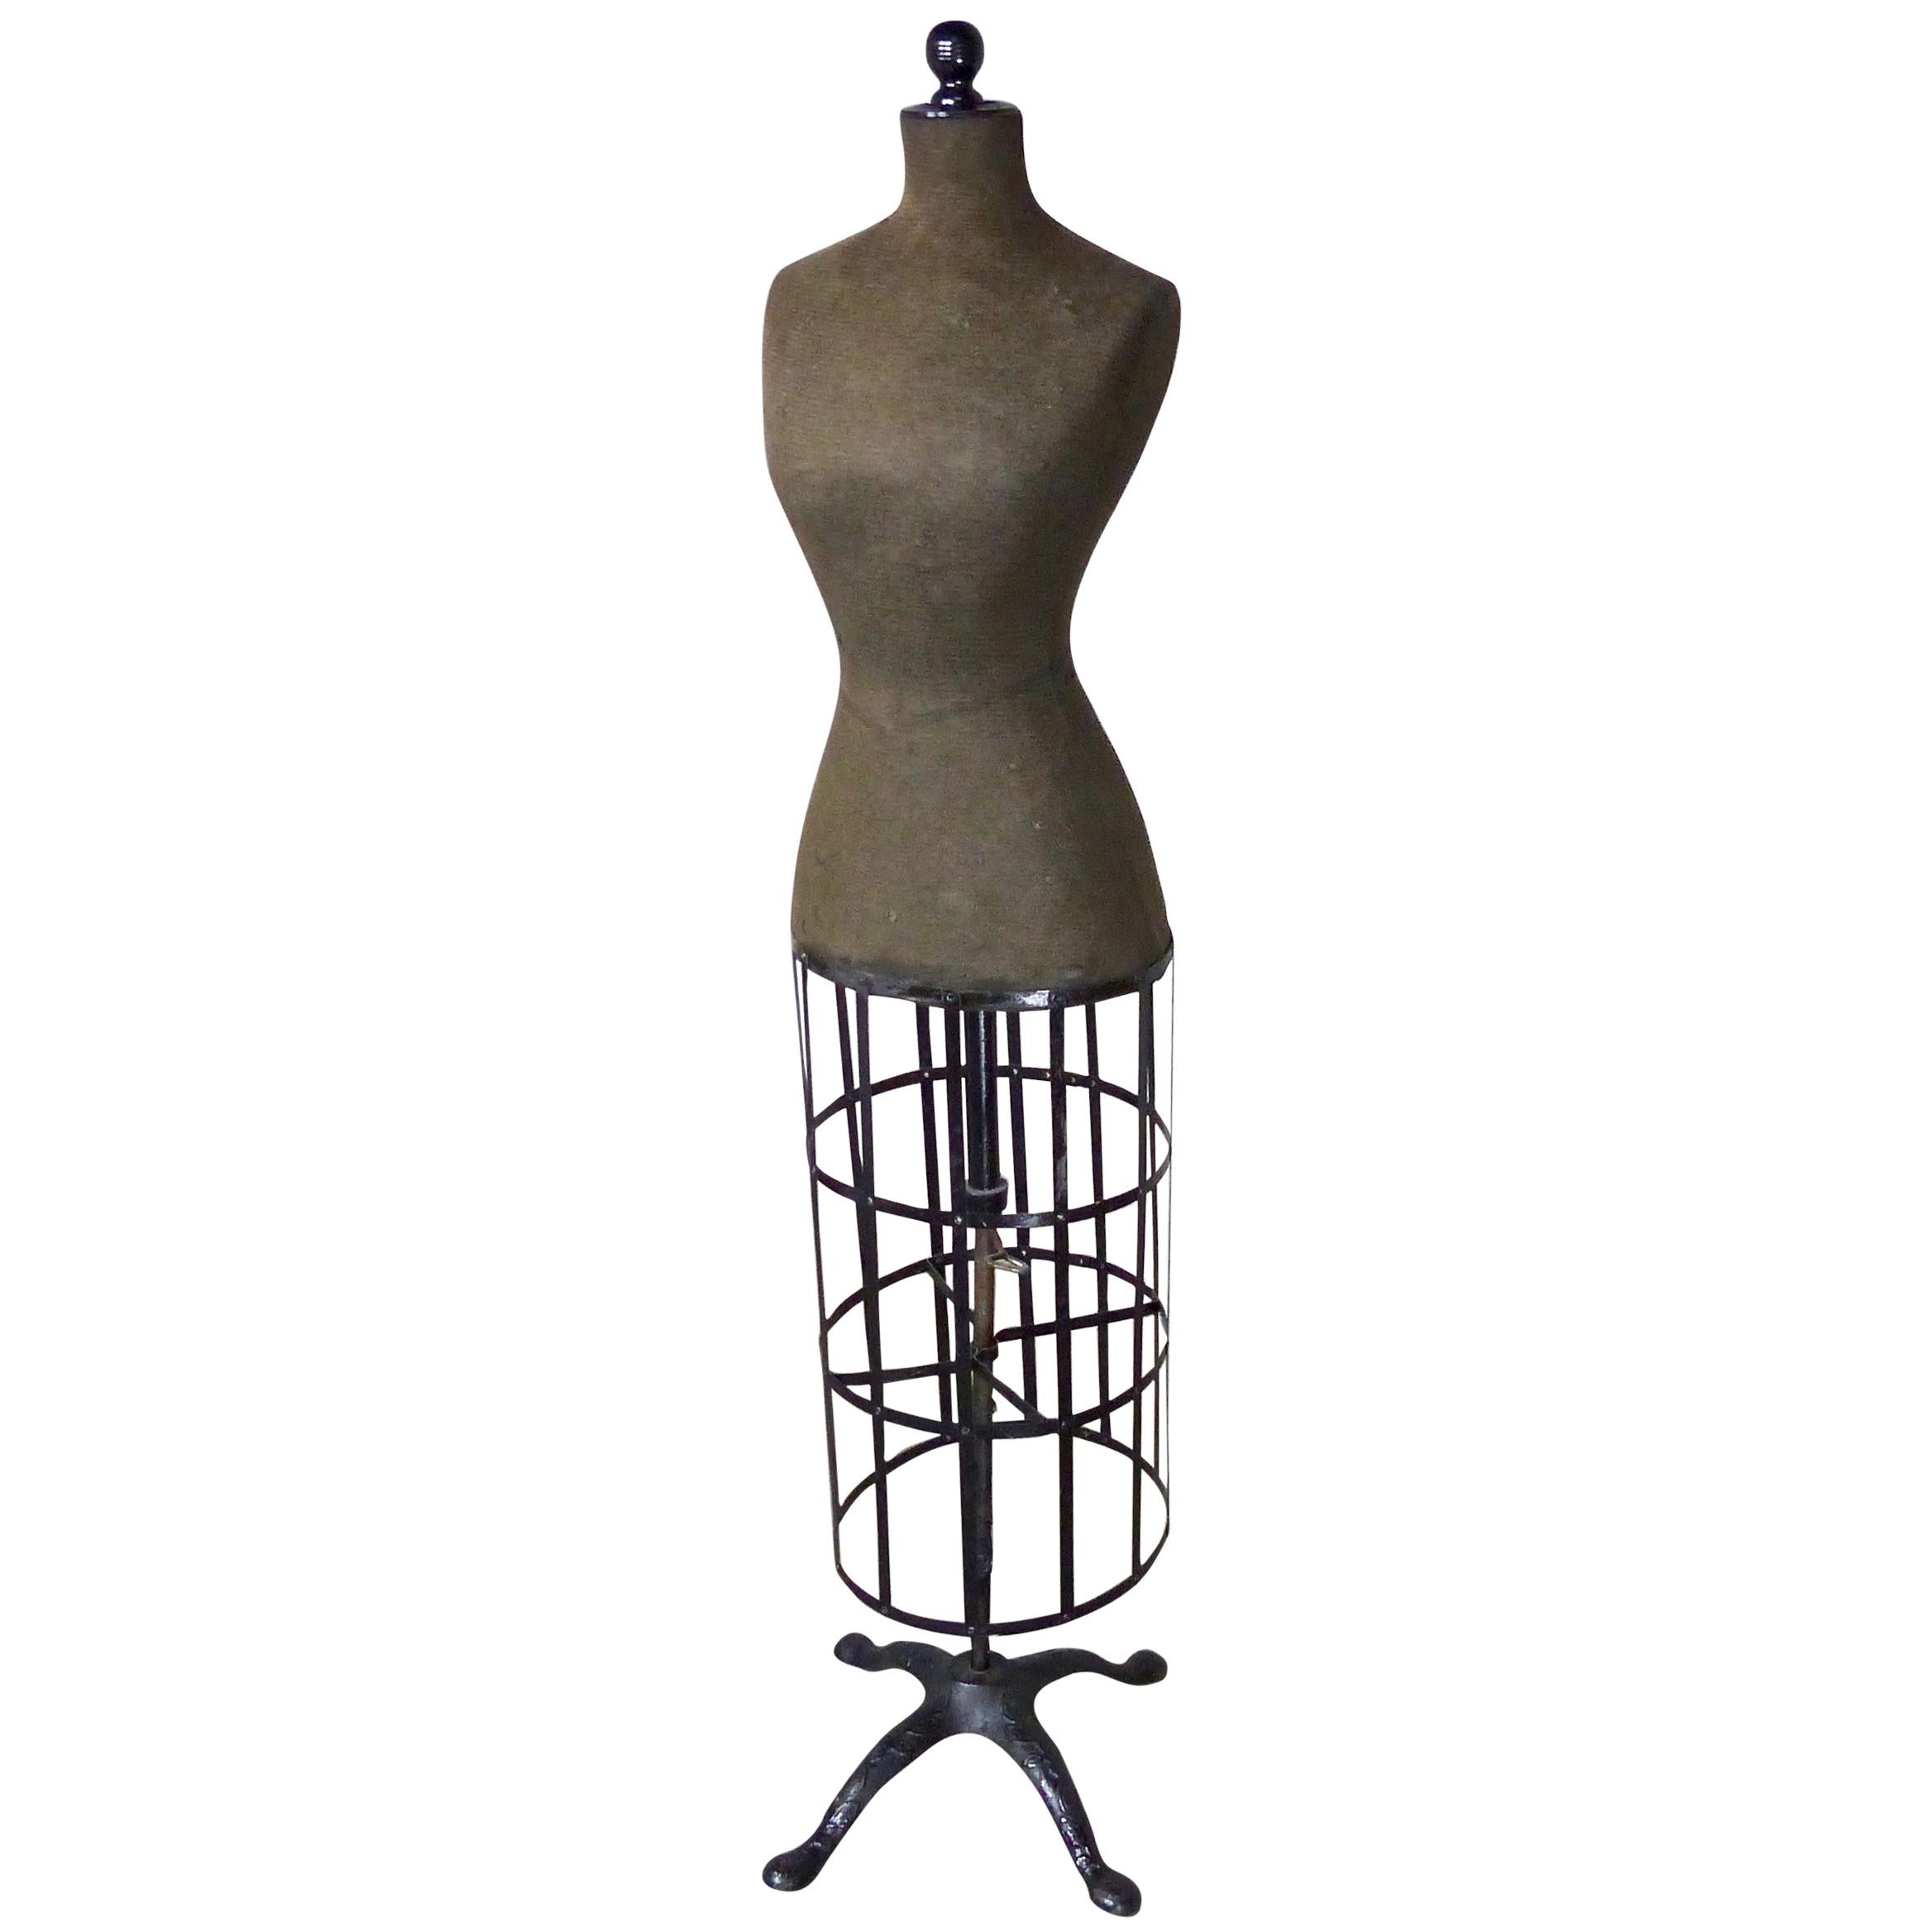 Victorian ACME Dress Form with Cast Iron Base